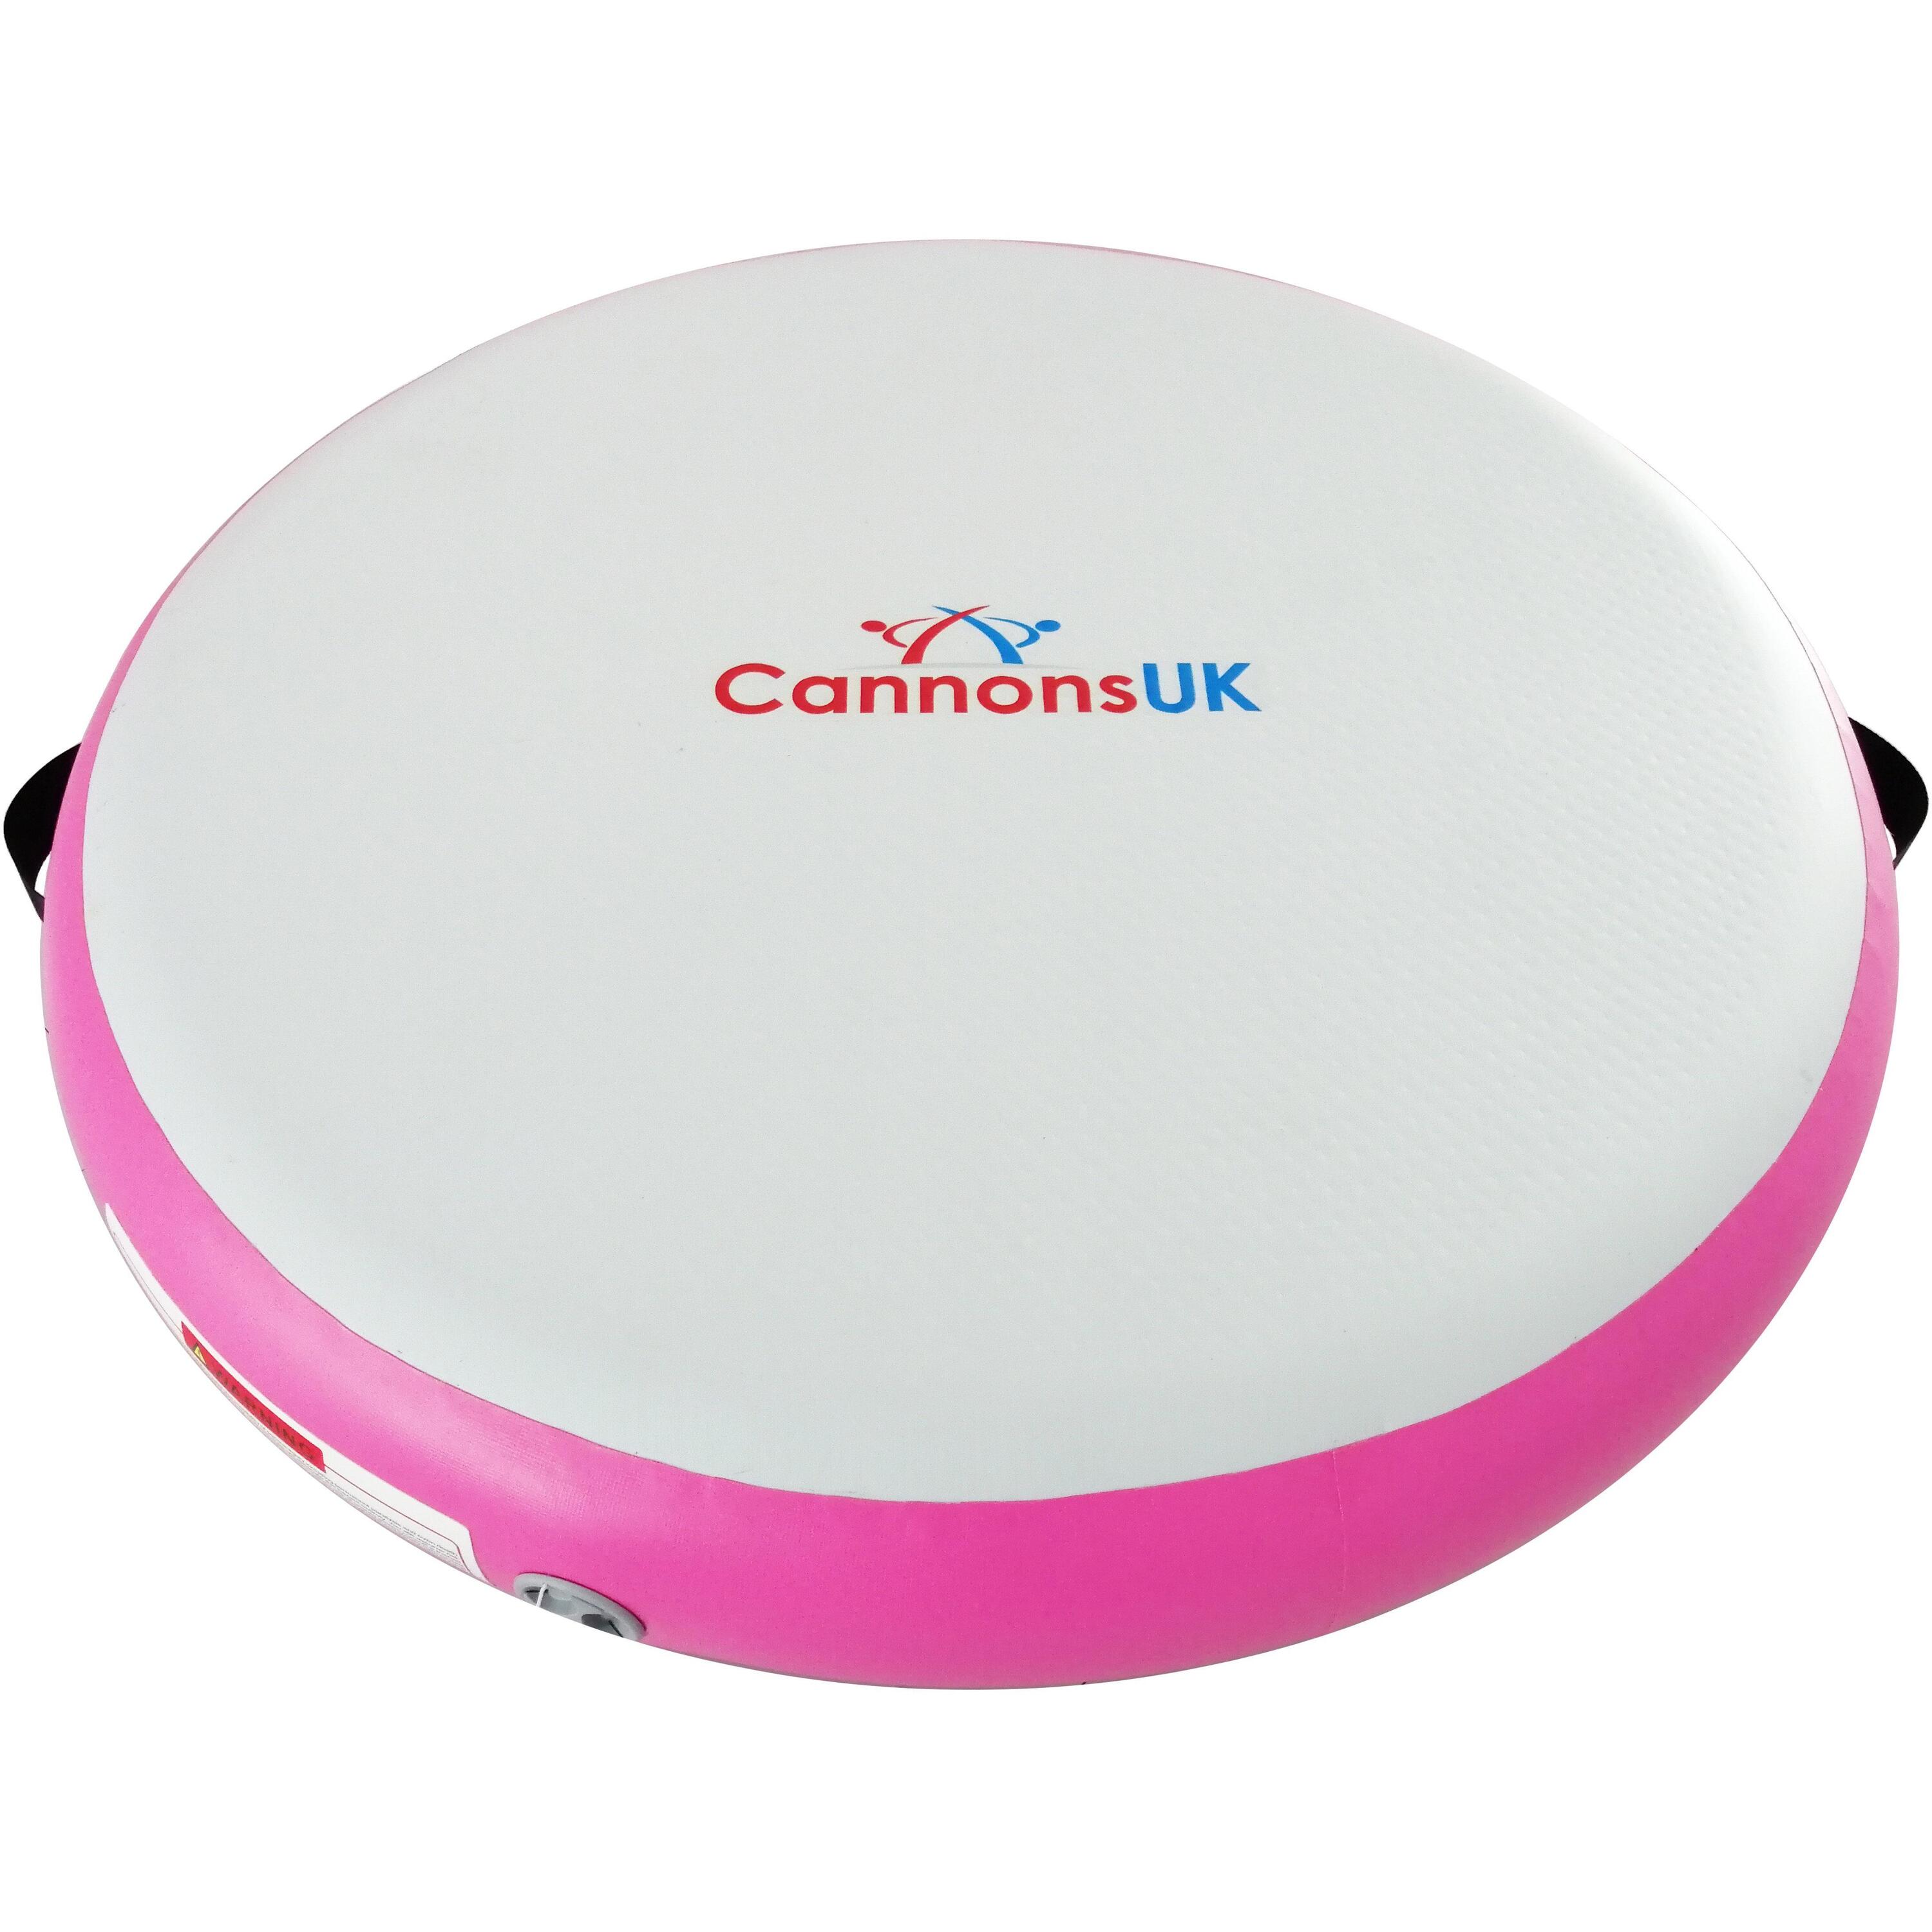 CANNONS UK Cannons UK Air Track Pro Air Spot, Pink